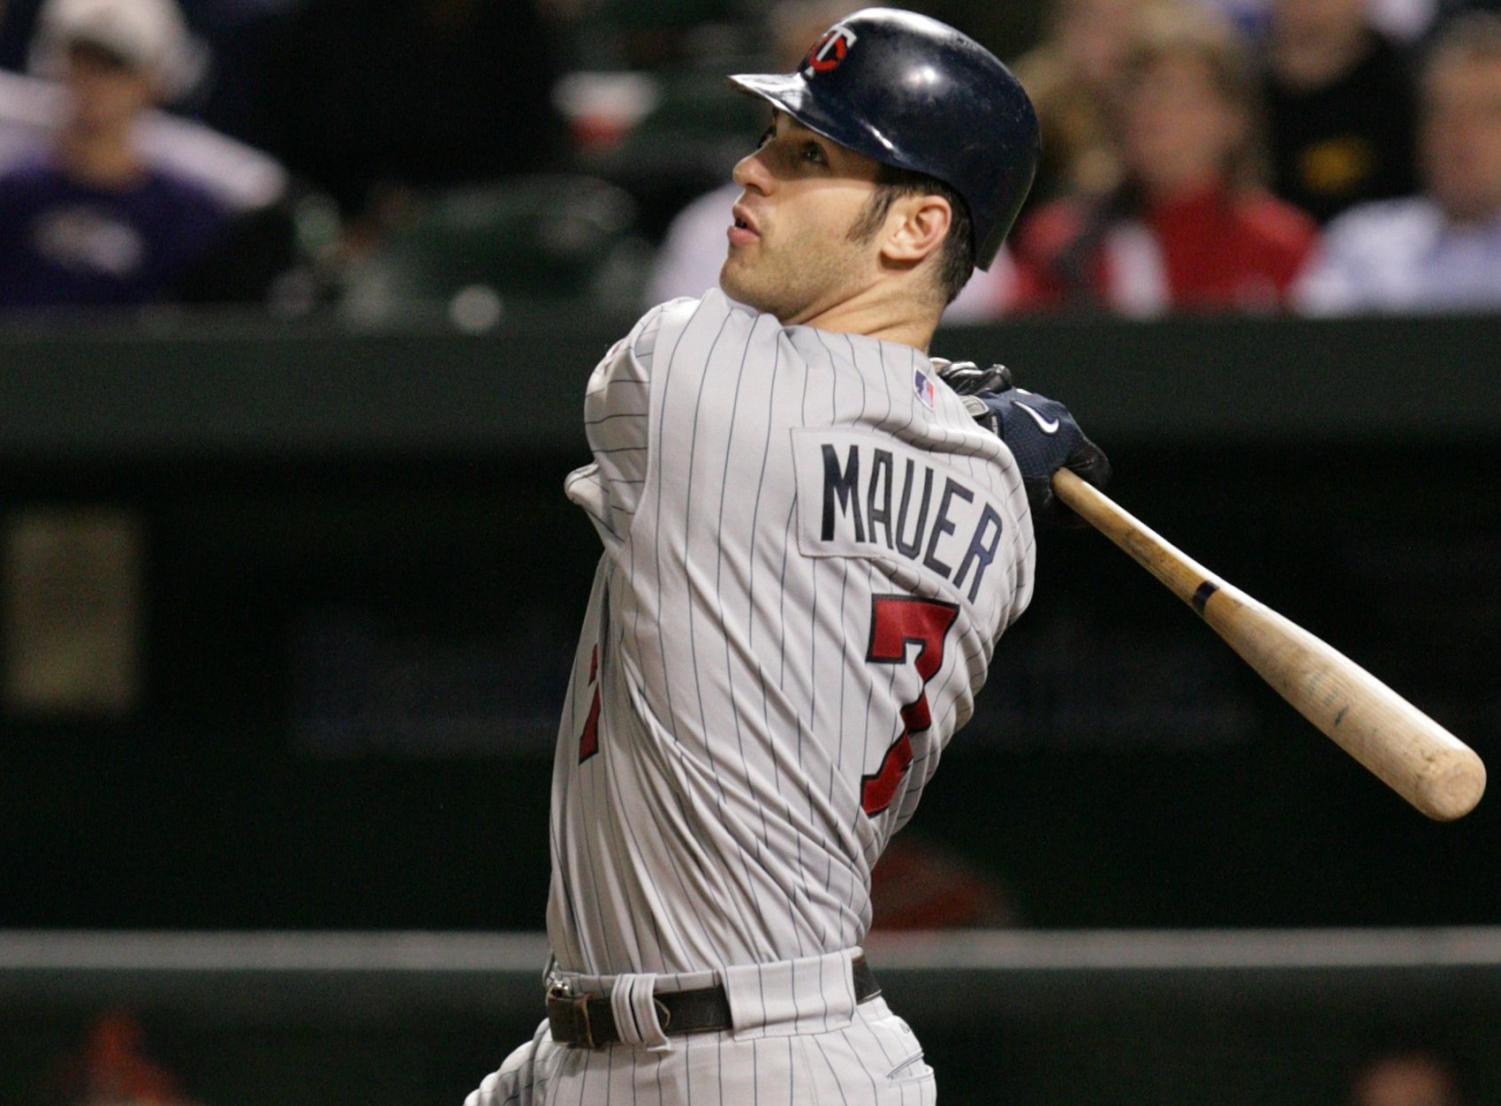 Joe Mauer plays final game with the Twins – The Nationalist